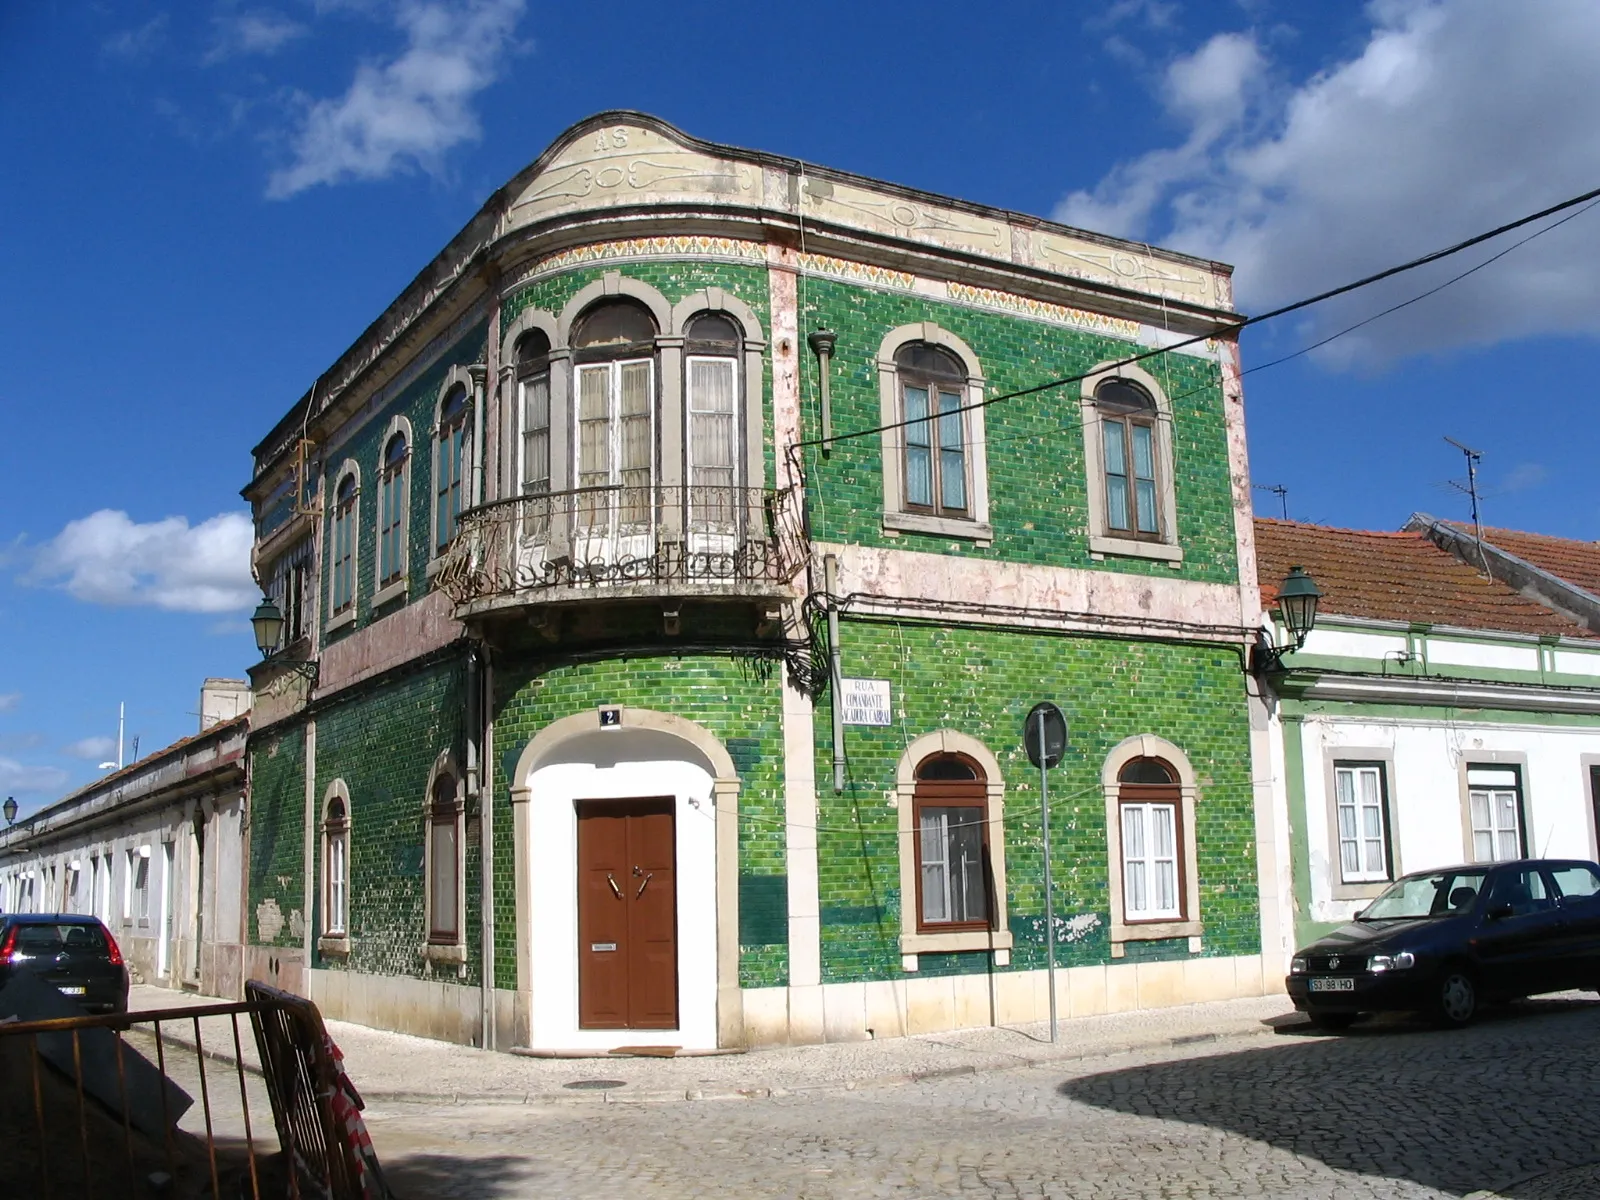 Photo showing: Green-tiled house in Alcochete, Portugal.
This is an example of typical architecture of that town.